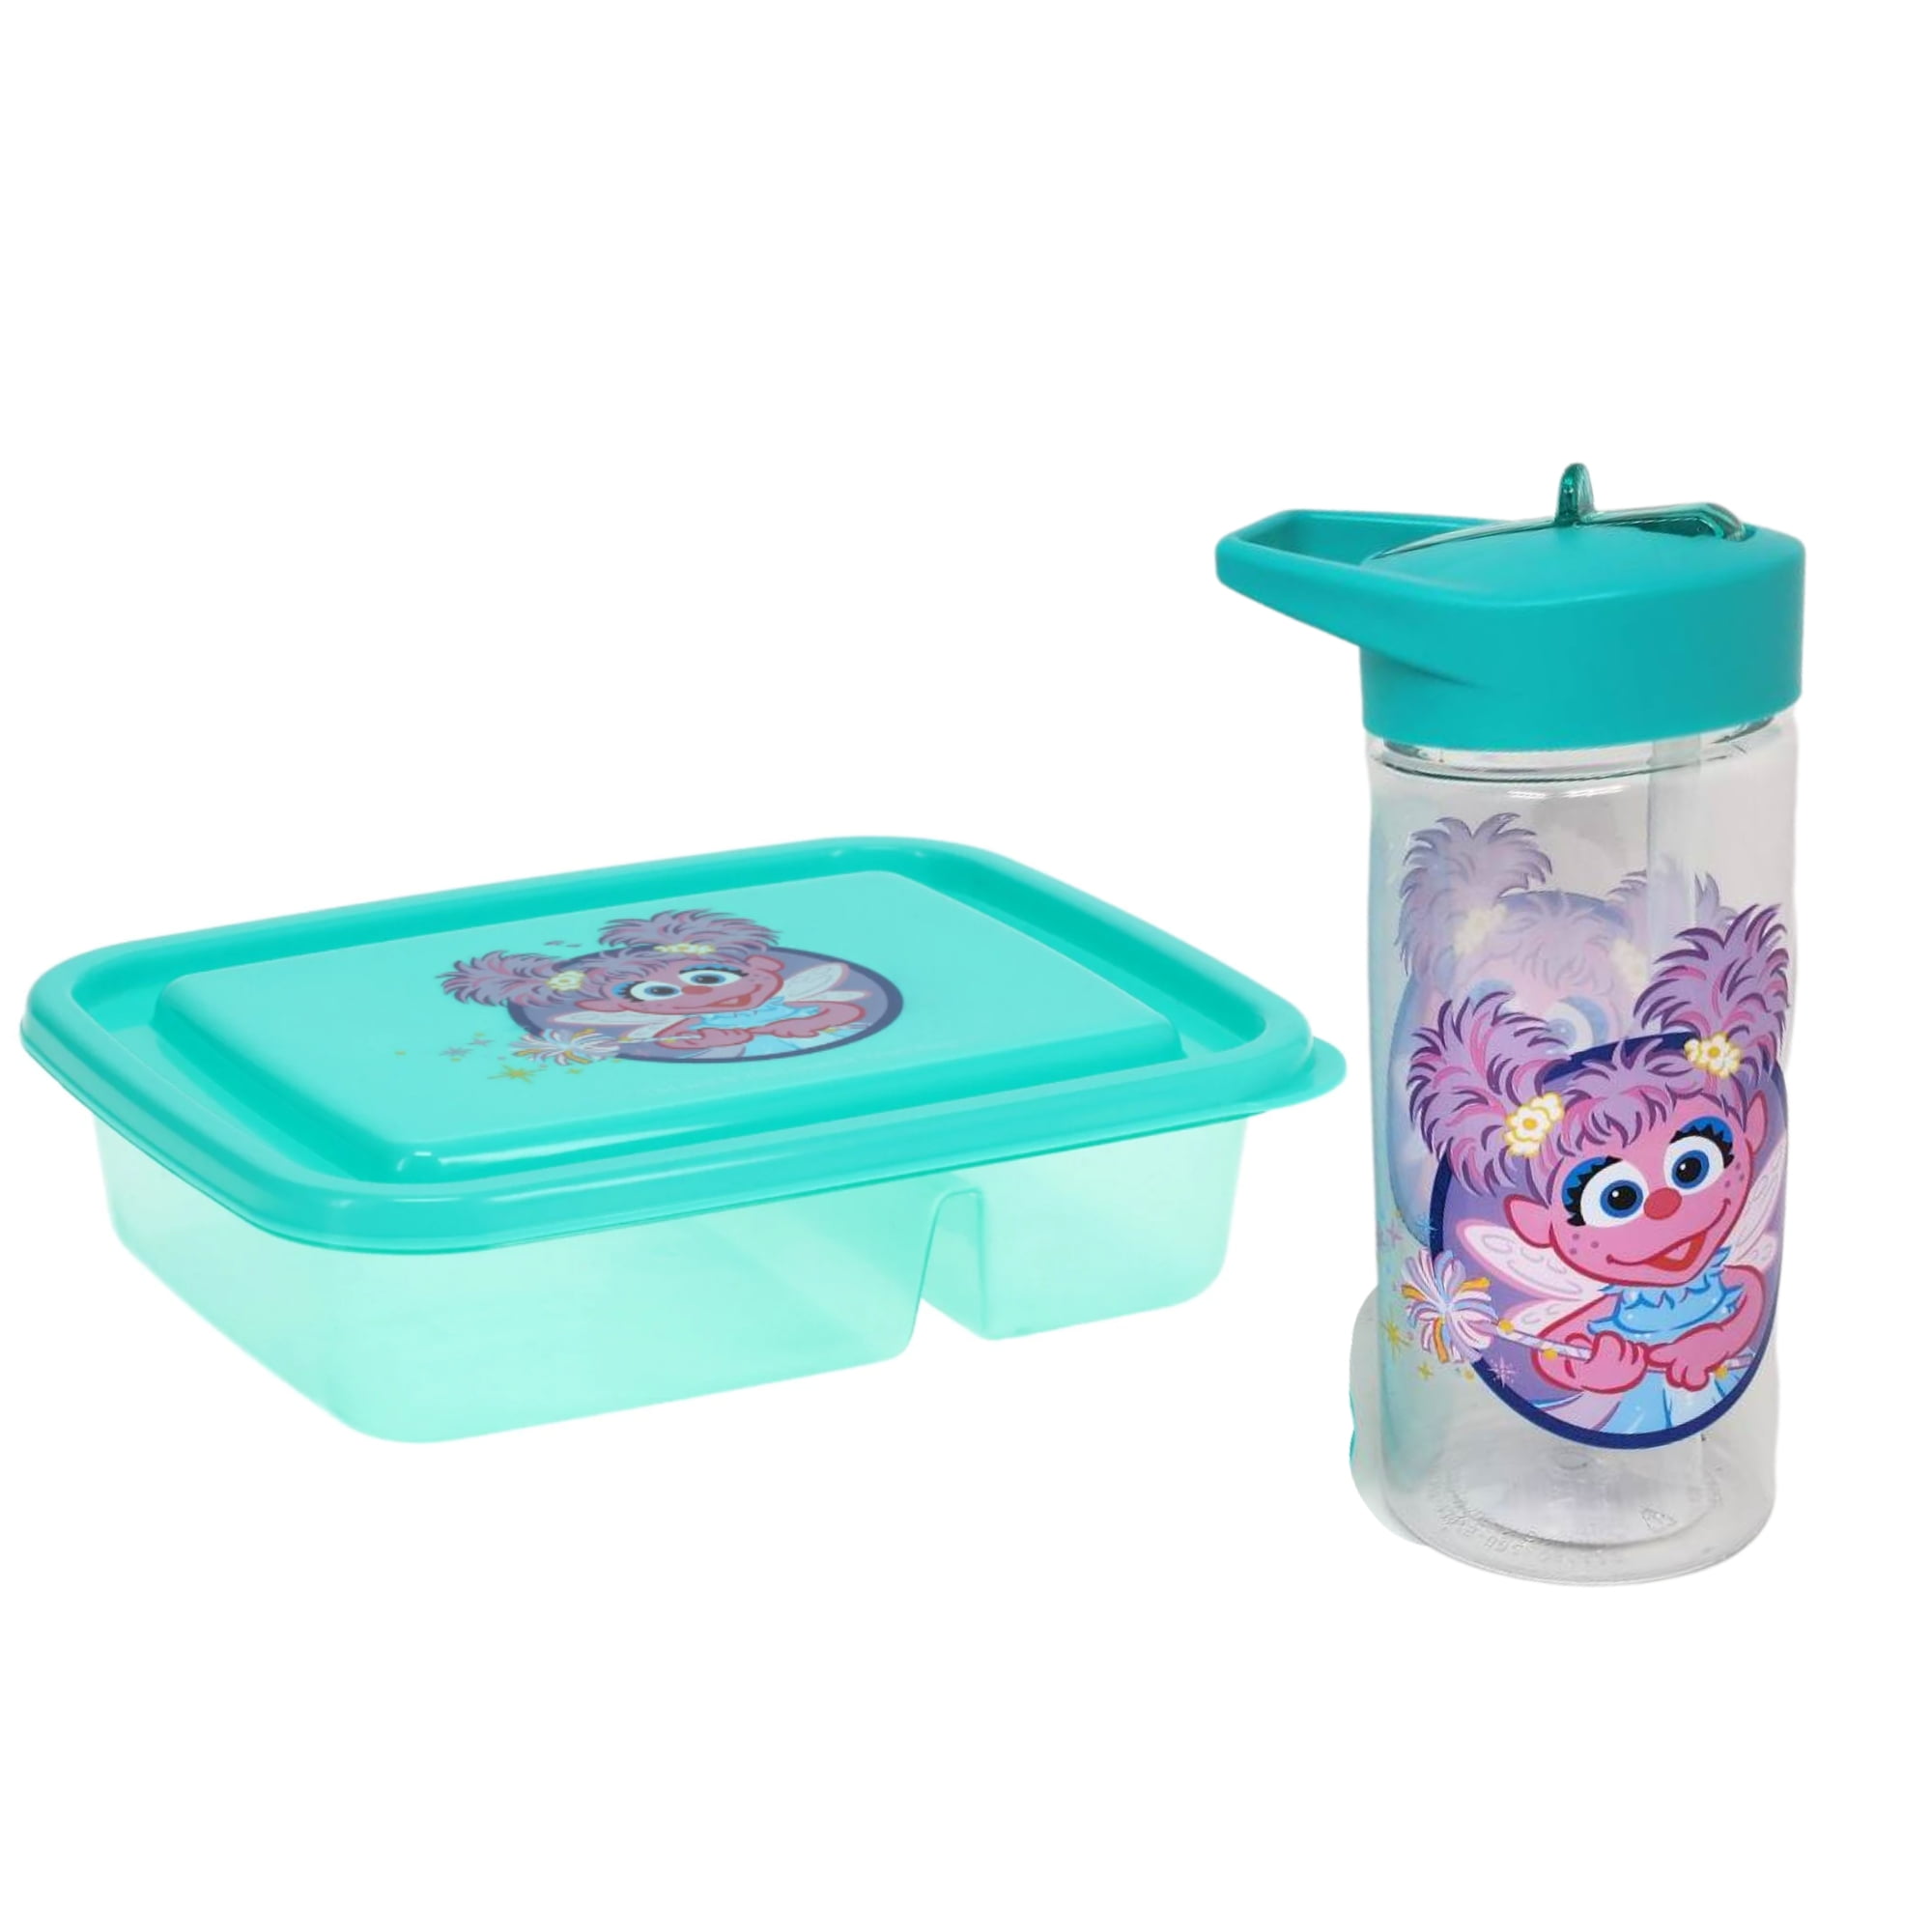 Sesame Street Elmo Lunch Box Kit for Kids Includes Red Bento Box and Tumbler with Straw BPA-Free Dishwasher Safe Toddler-Friendly Lunch Containers